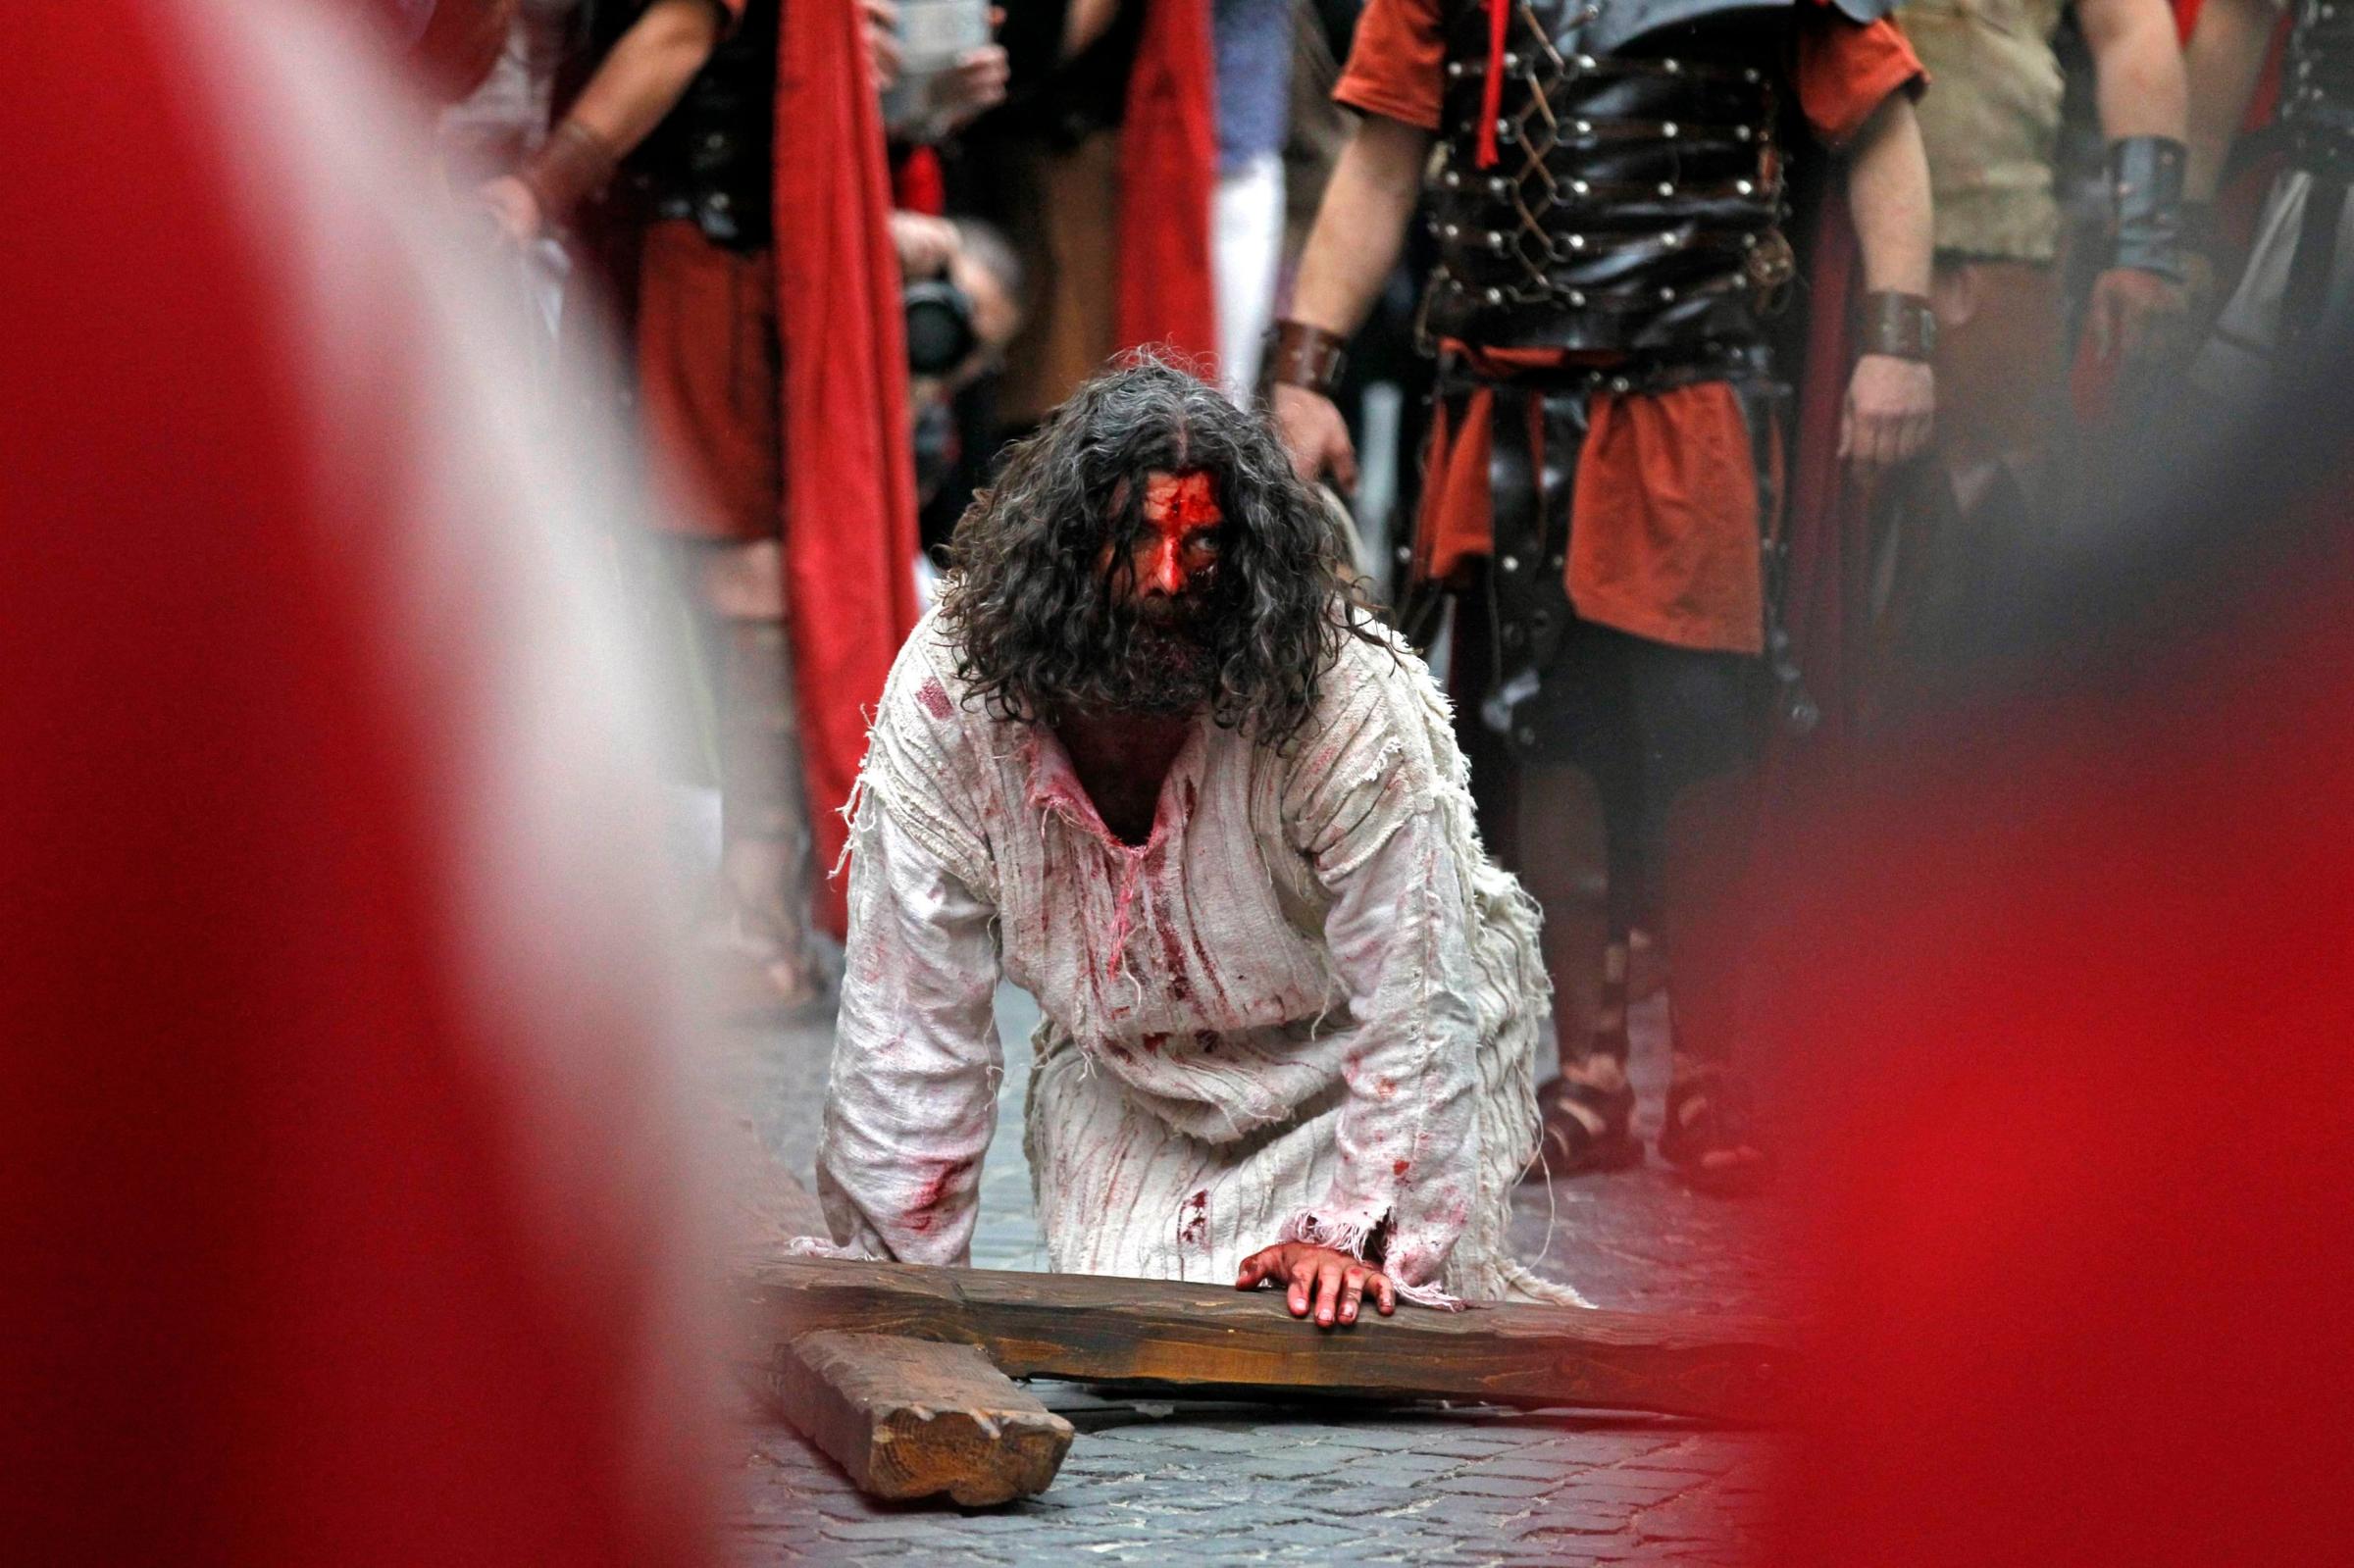 An actor takes part in a re-enactment of the "Via Crucis" during the Orthodox Holy Week celebrations in Bucharest